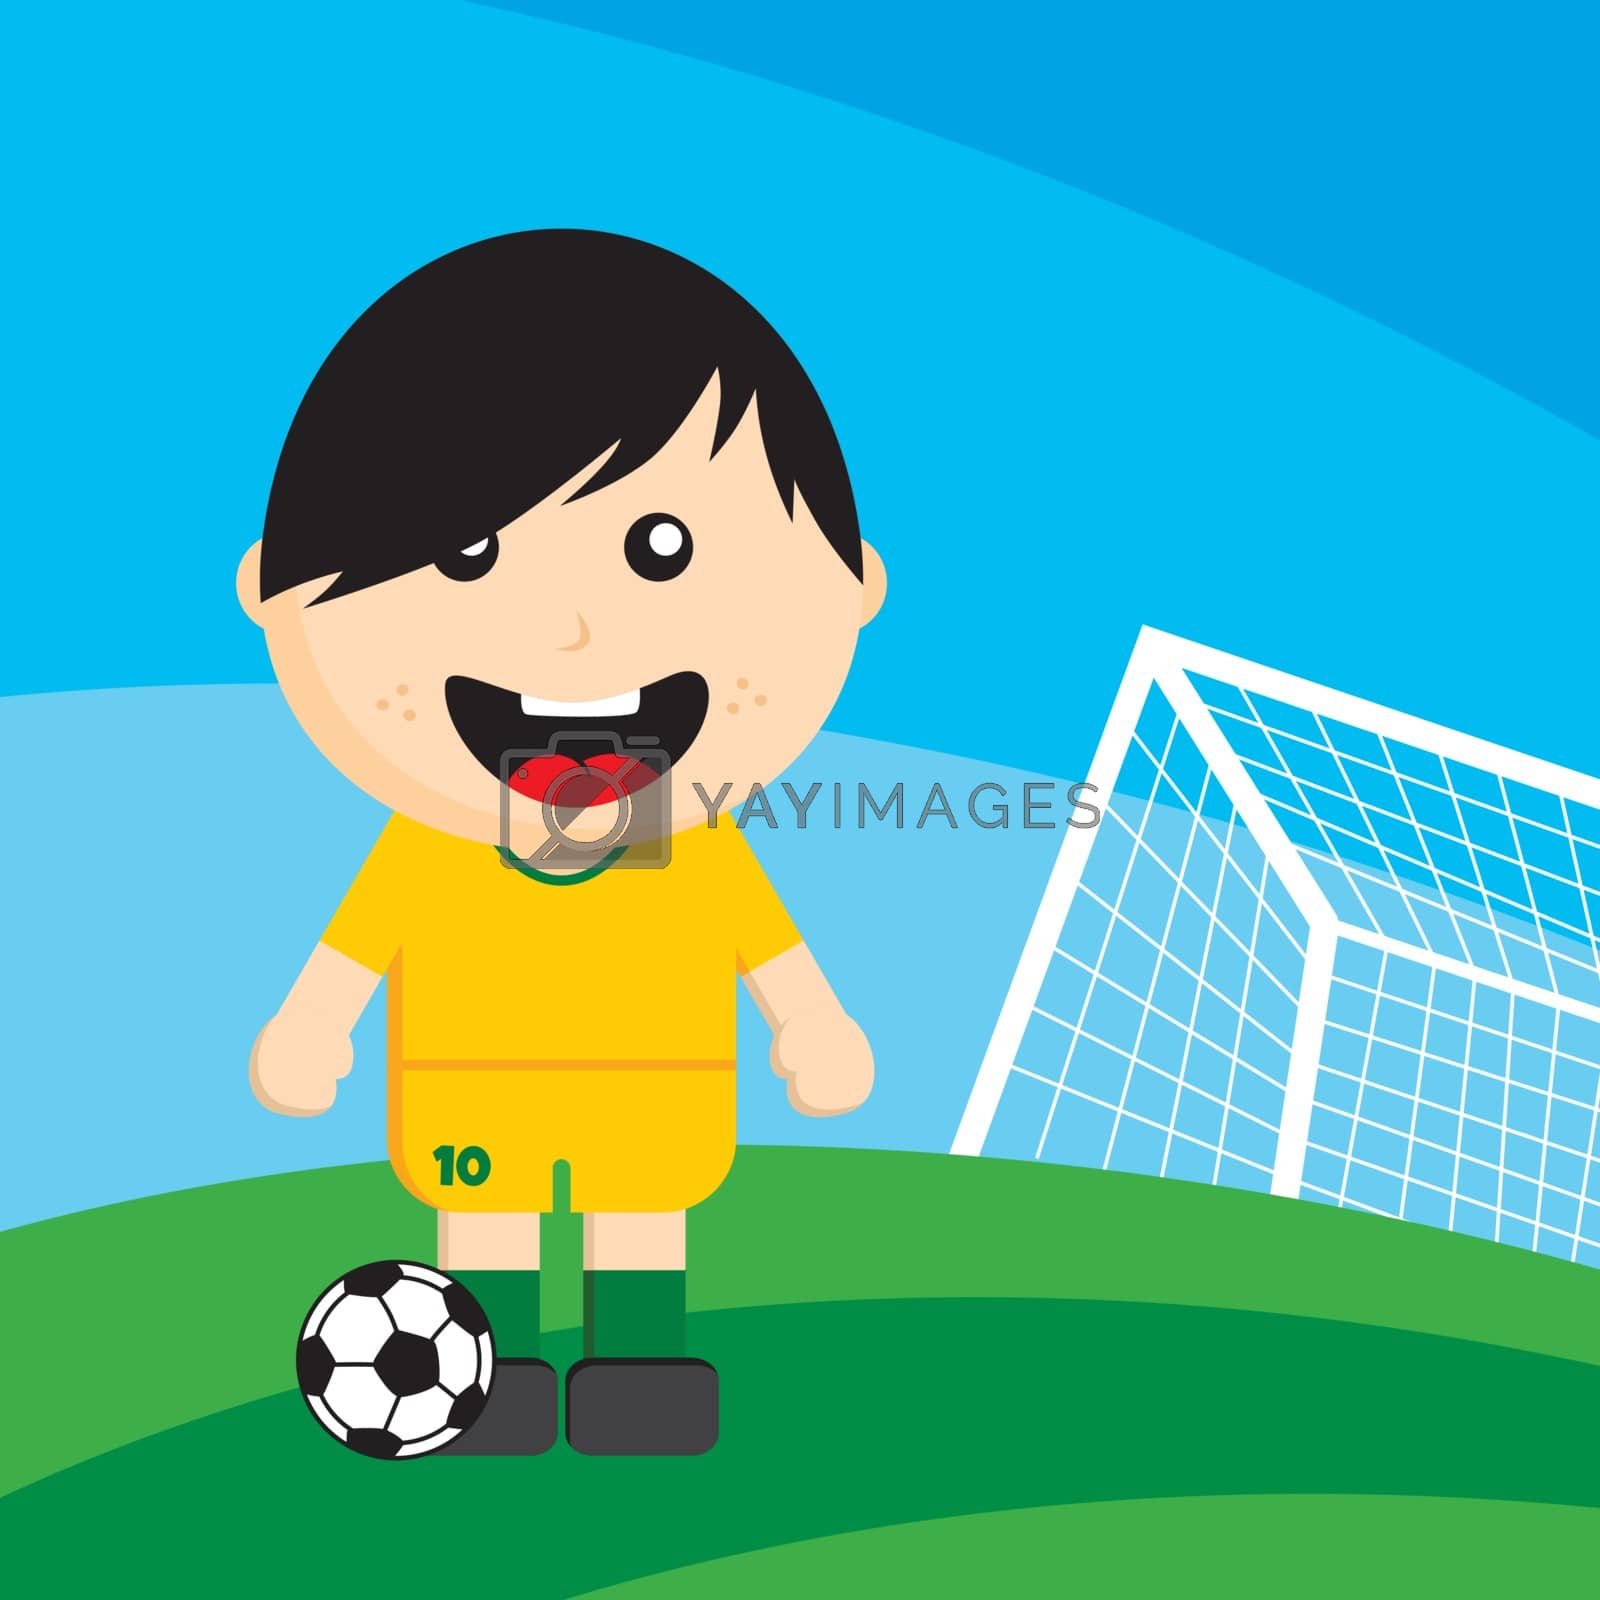 Royalty free image of group team soccer tournament by vector1st